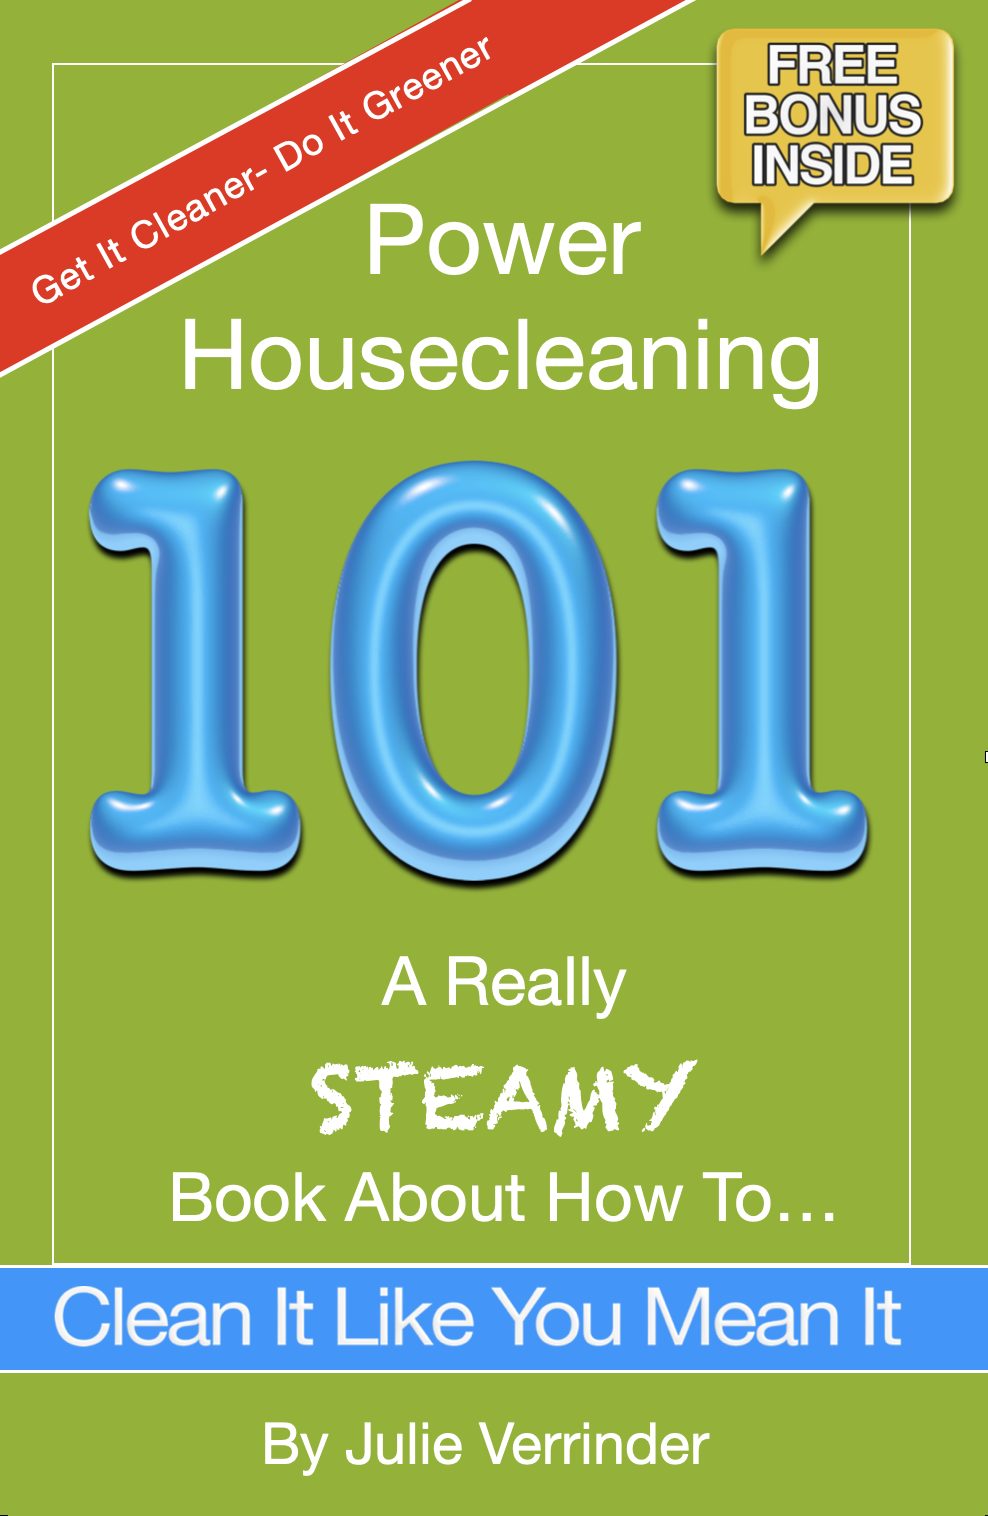 Sargent Steam Cleaner Power Housecleaning 101